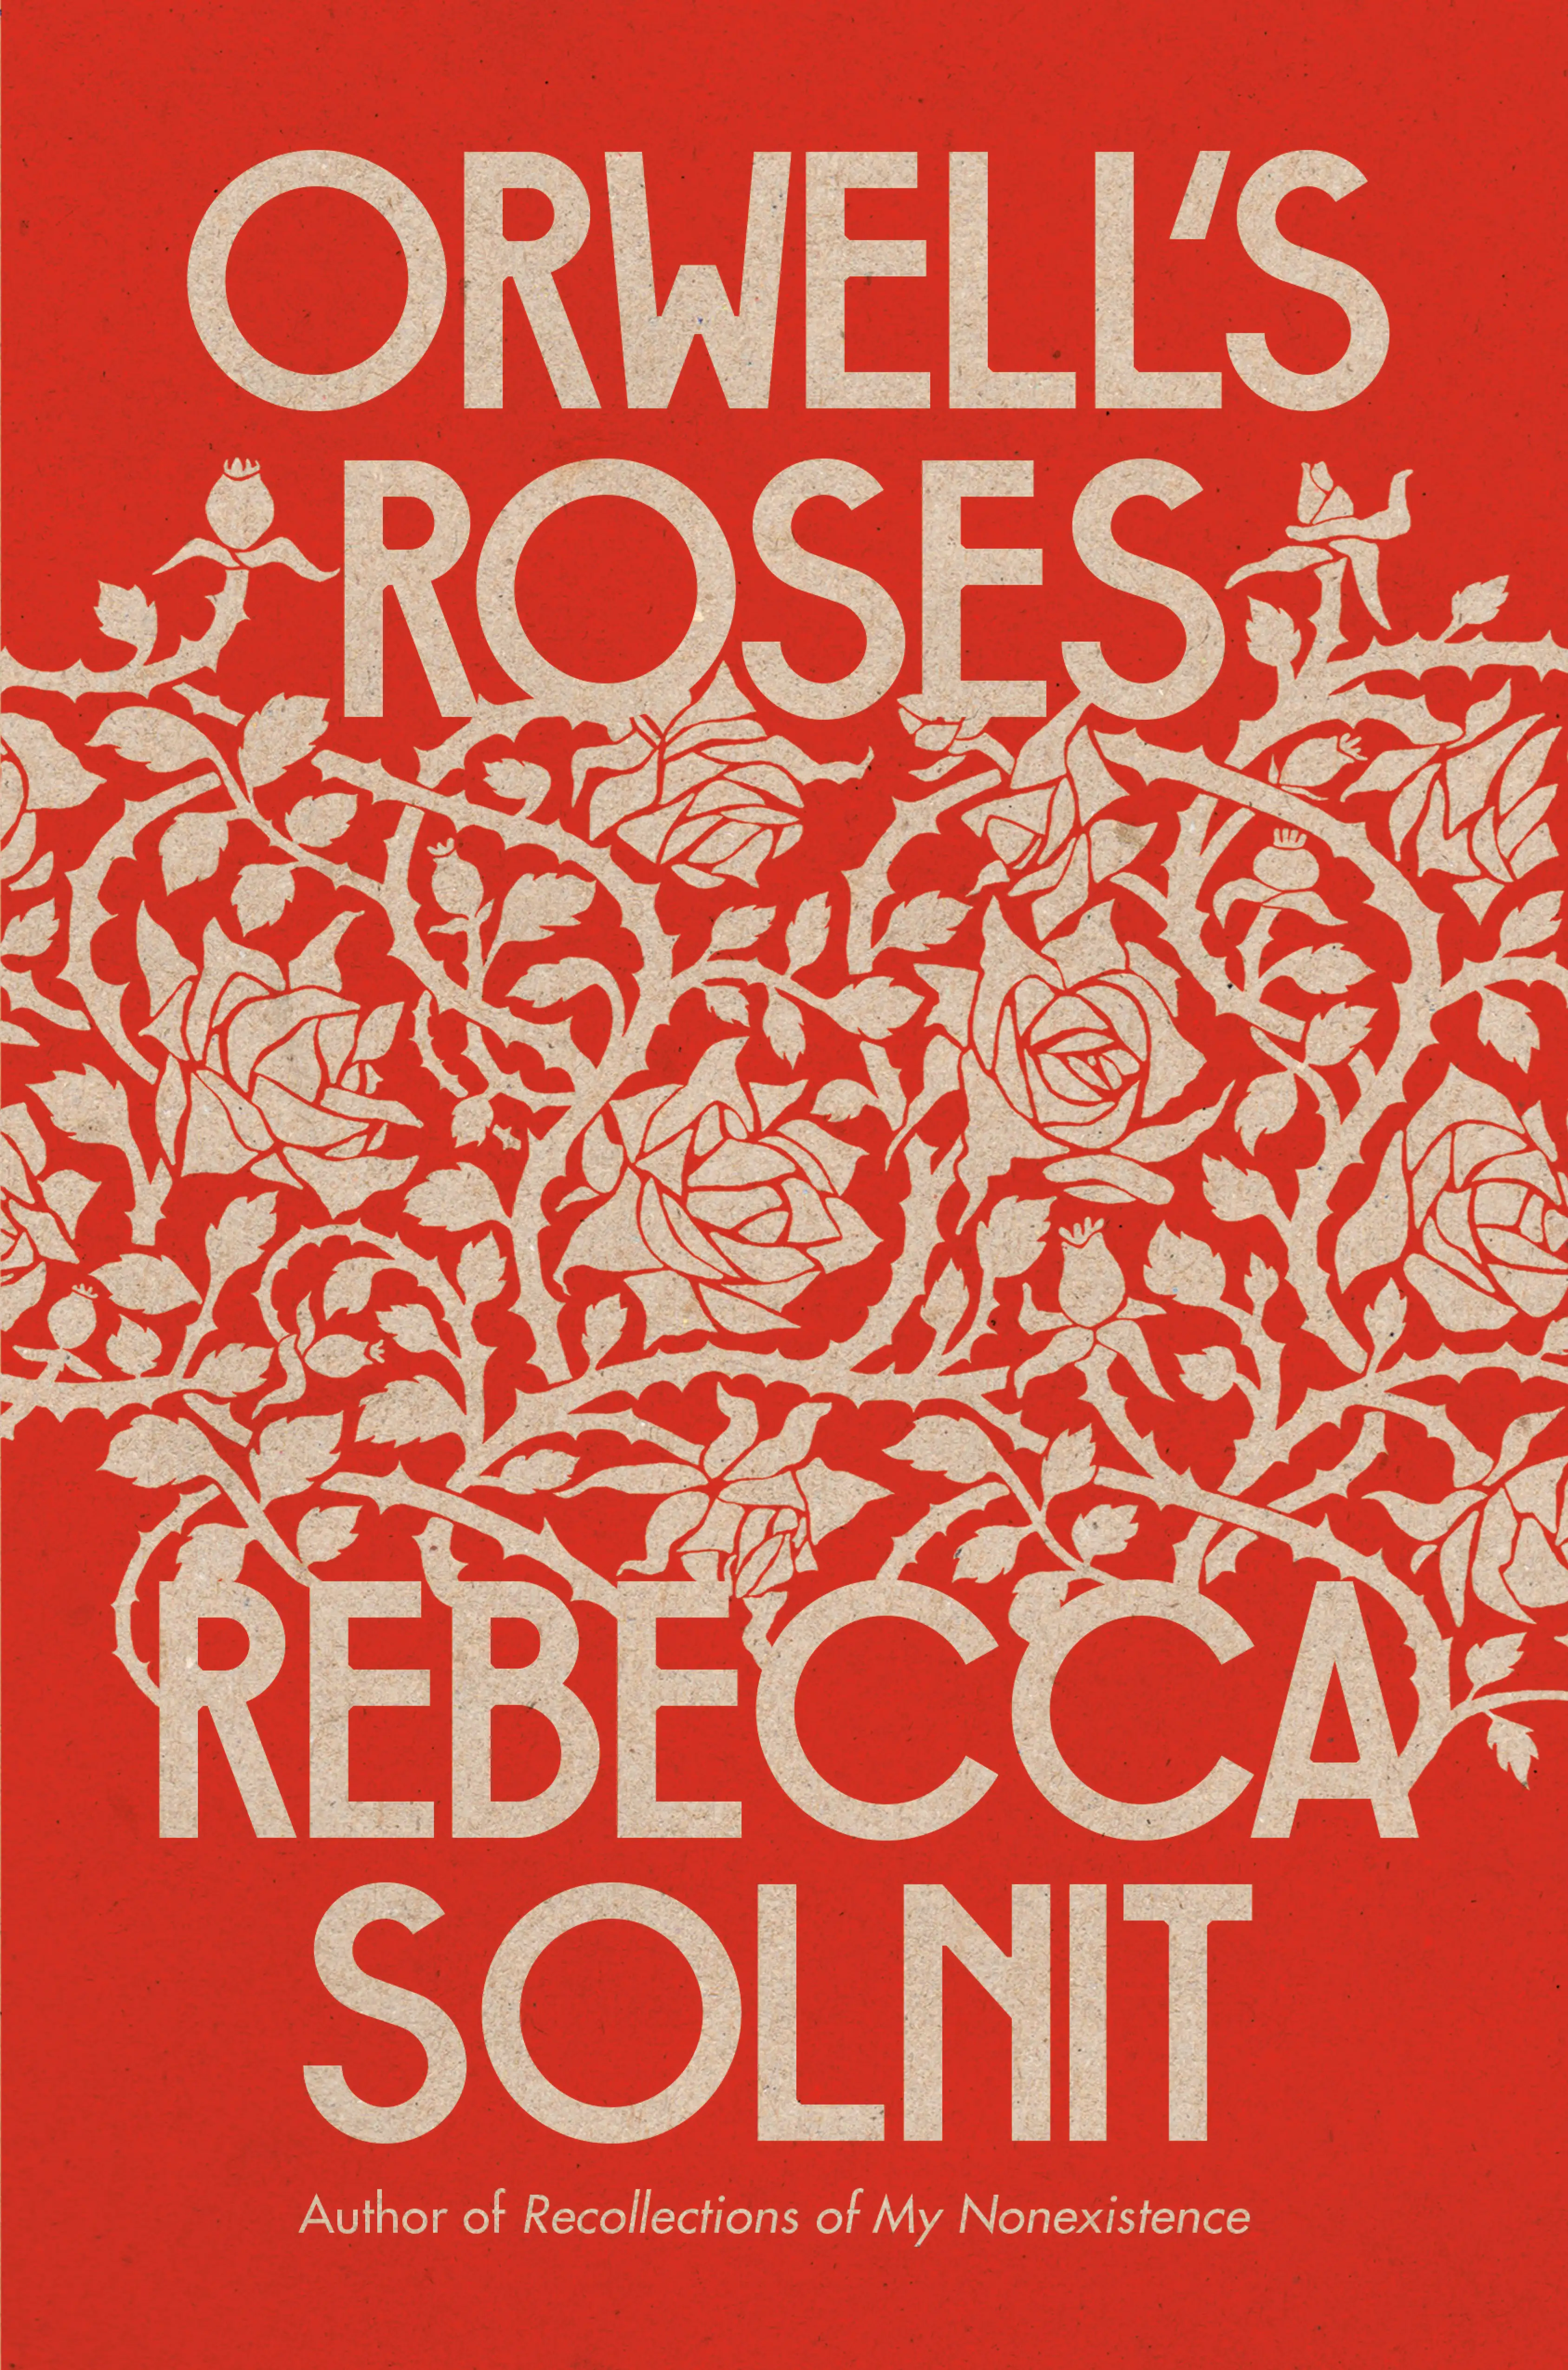 Orwell-s-Roses-cover